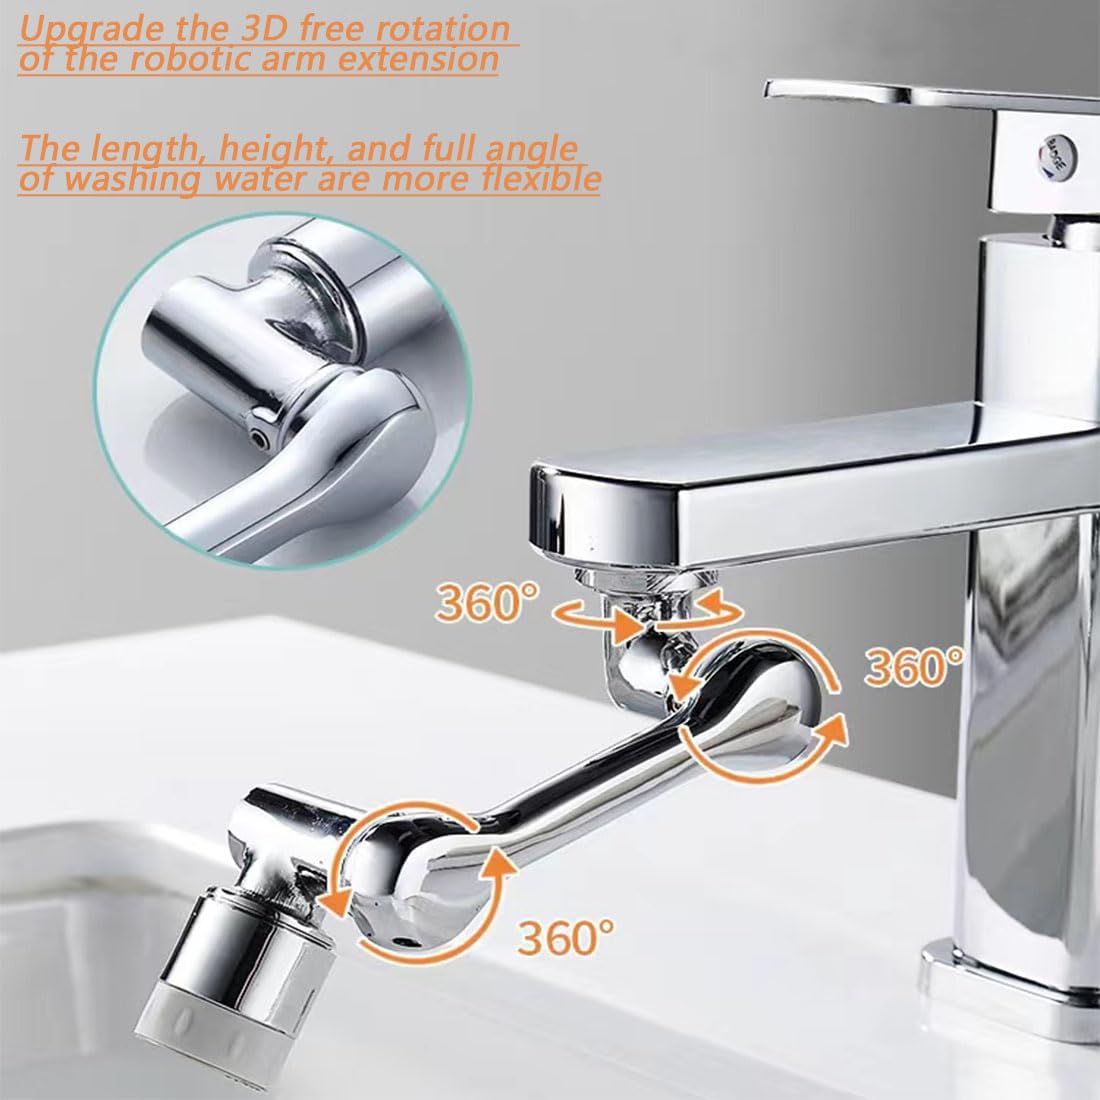 1080° Rotating Faucet Extender for kitchen faucet extension with 2 Water Outlet Modes, Universal Swivel Faucet Attachment, Multifunctional Splash Filter Robotic Arm Splash Filter Faucet Dual mode